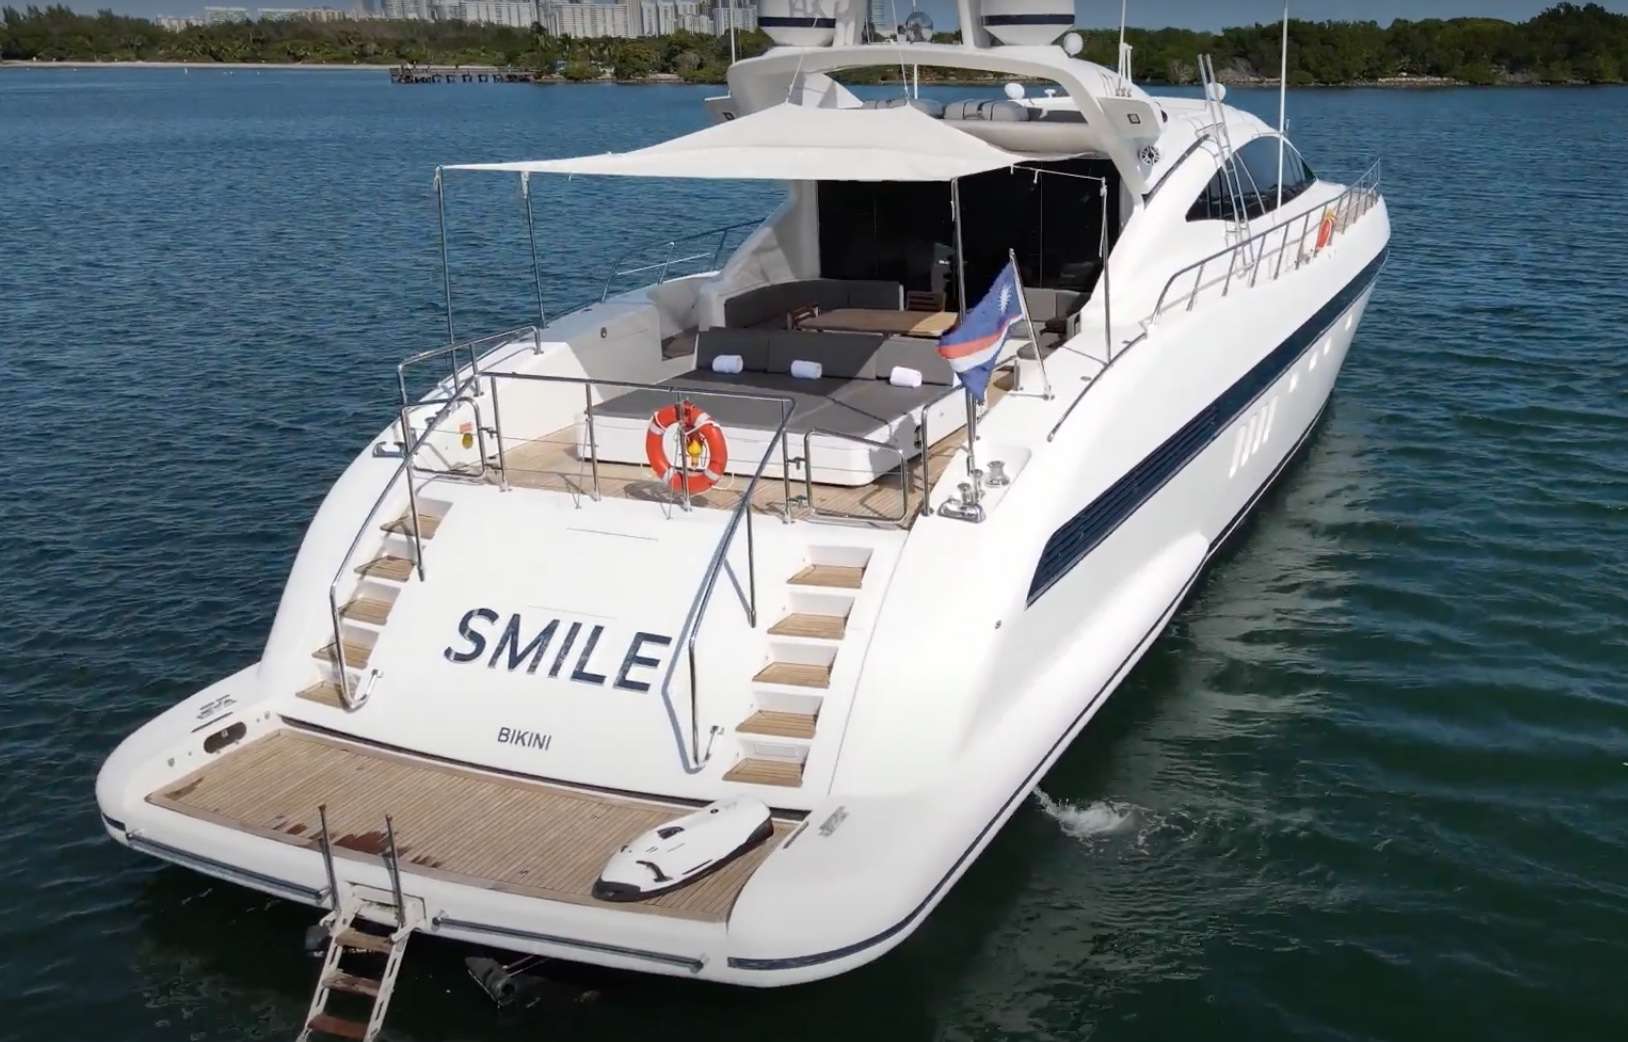 SMILE - Yacht Charter Key West & Boat hire in Florida & Bahamas 3